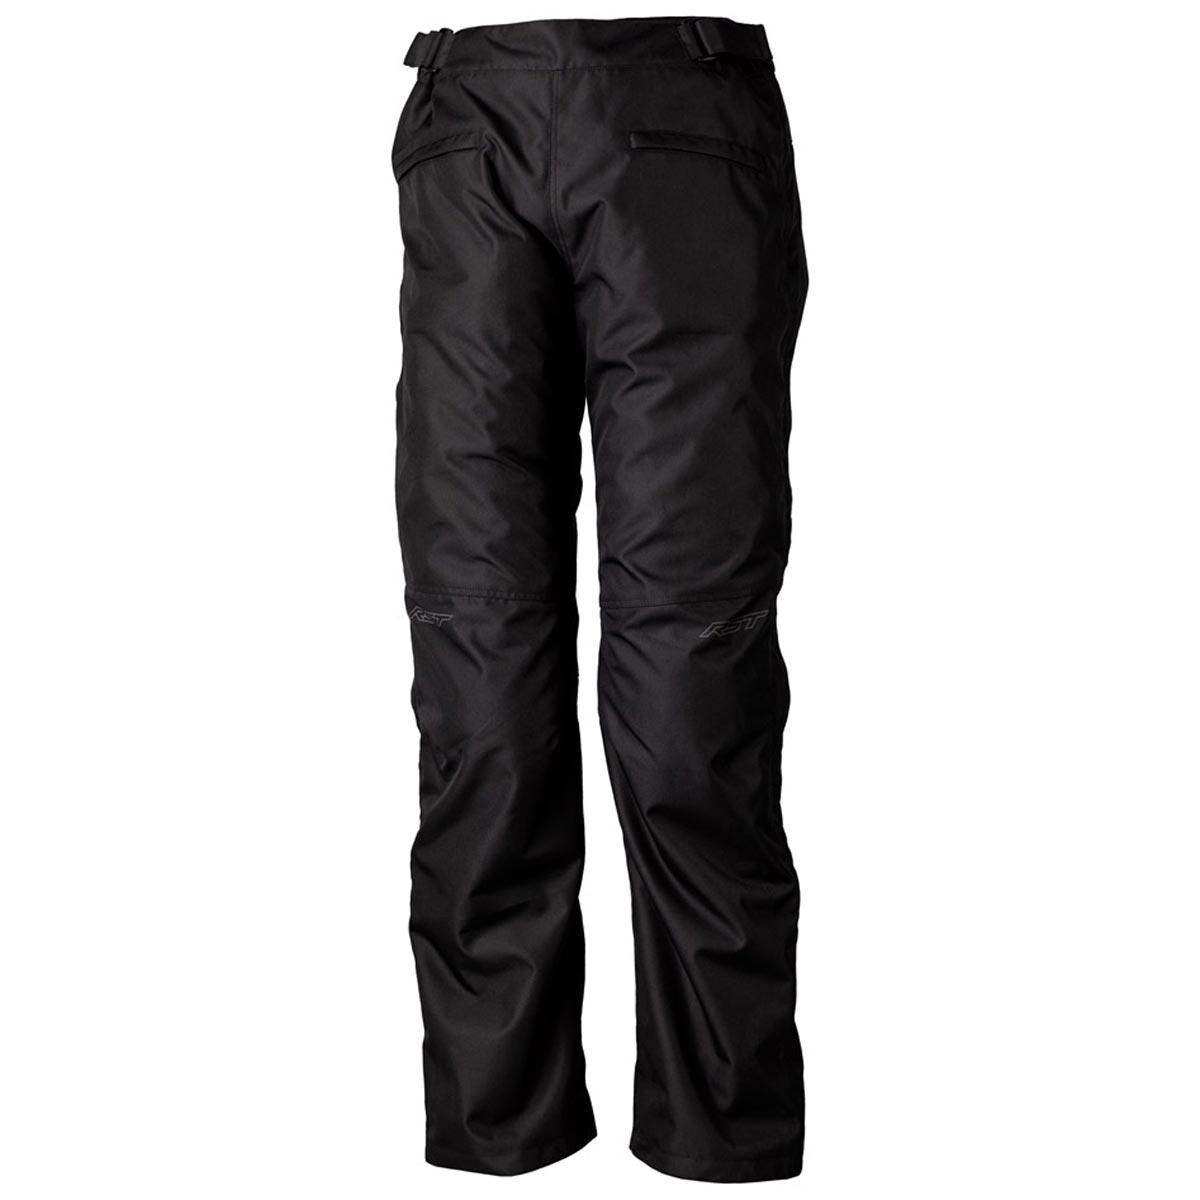 Mens Motorcycle Biker Waterproof Windproof Riding Pants Black with  Removable CE Armor PT1 2XL  Amazonin Car  Motorbike